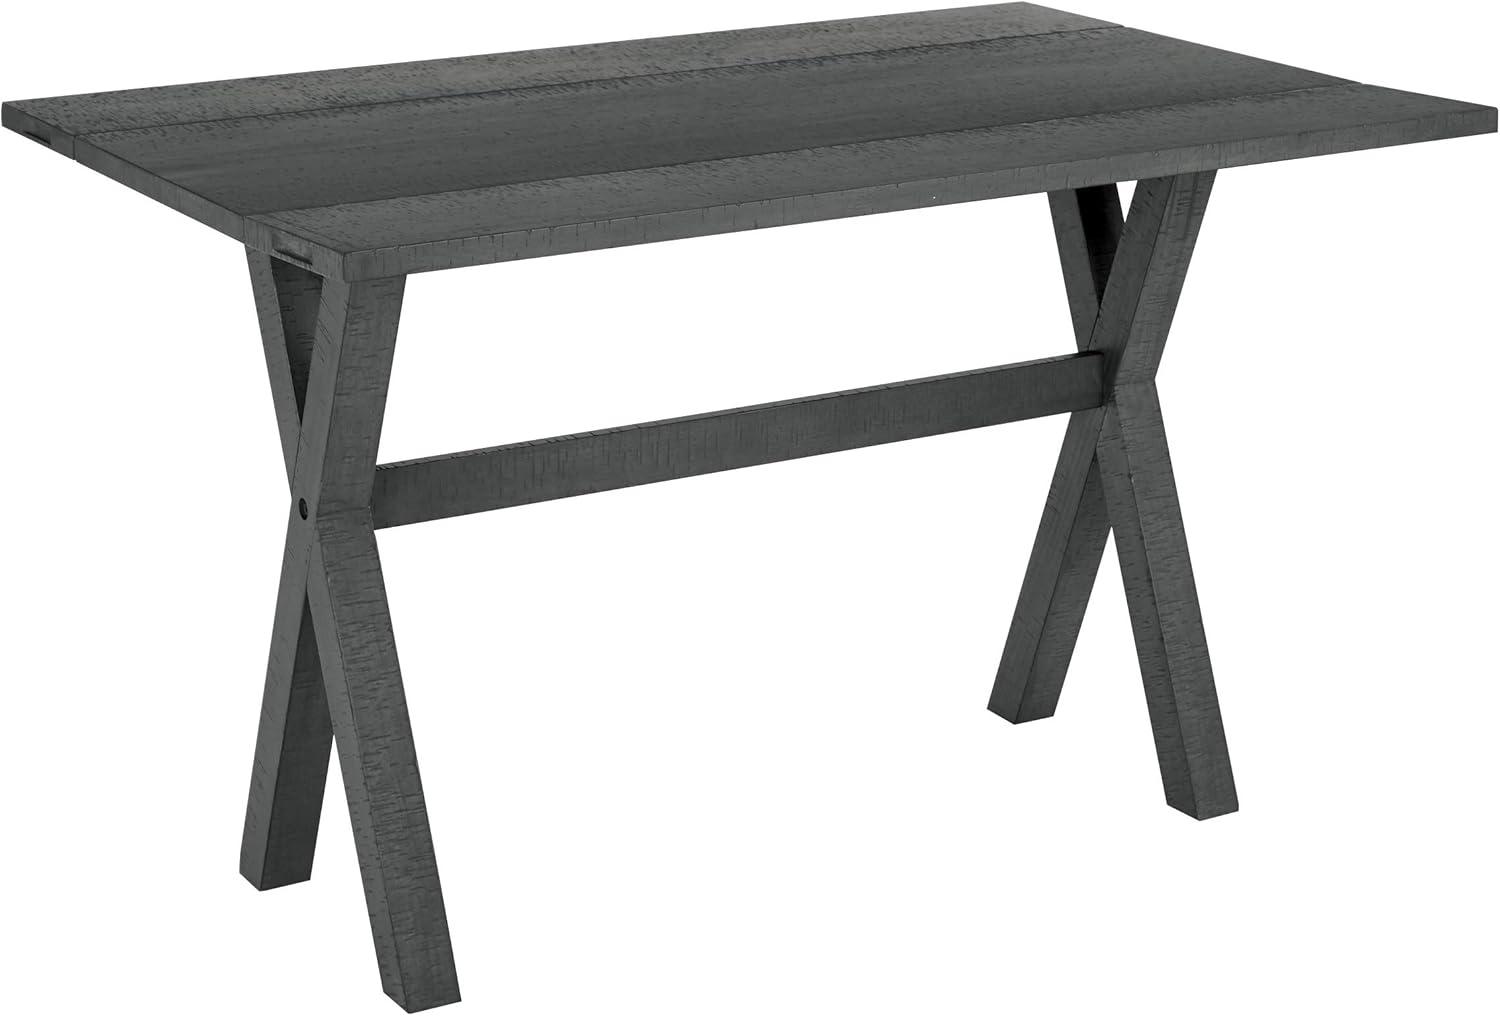 Farmhouse Reclaimed Wood Extendable Dining Table in Washed Grey